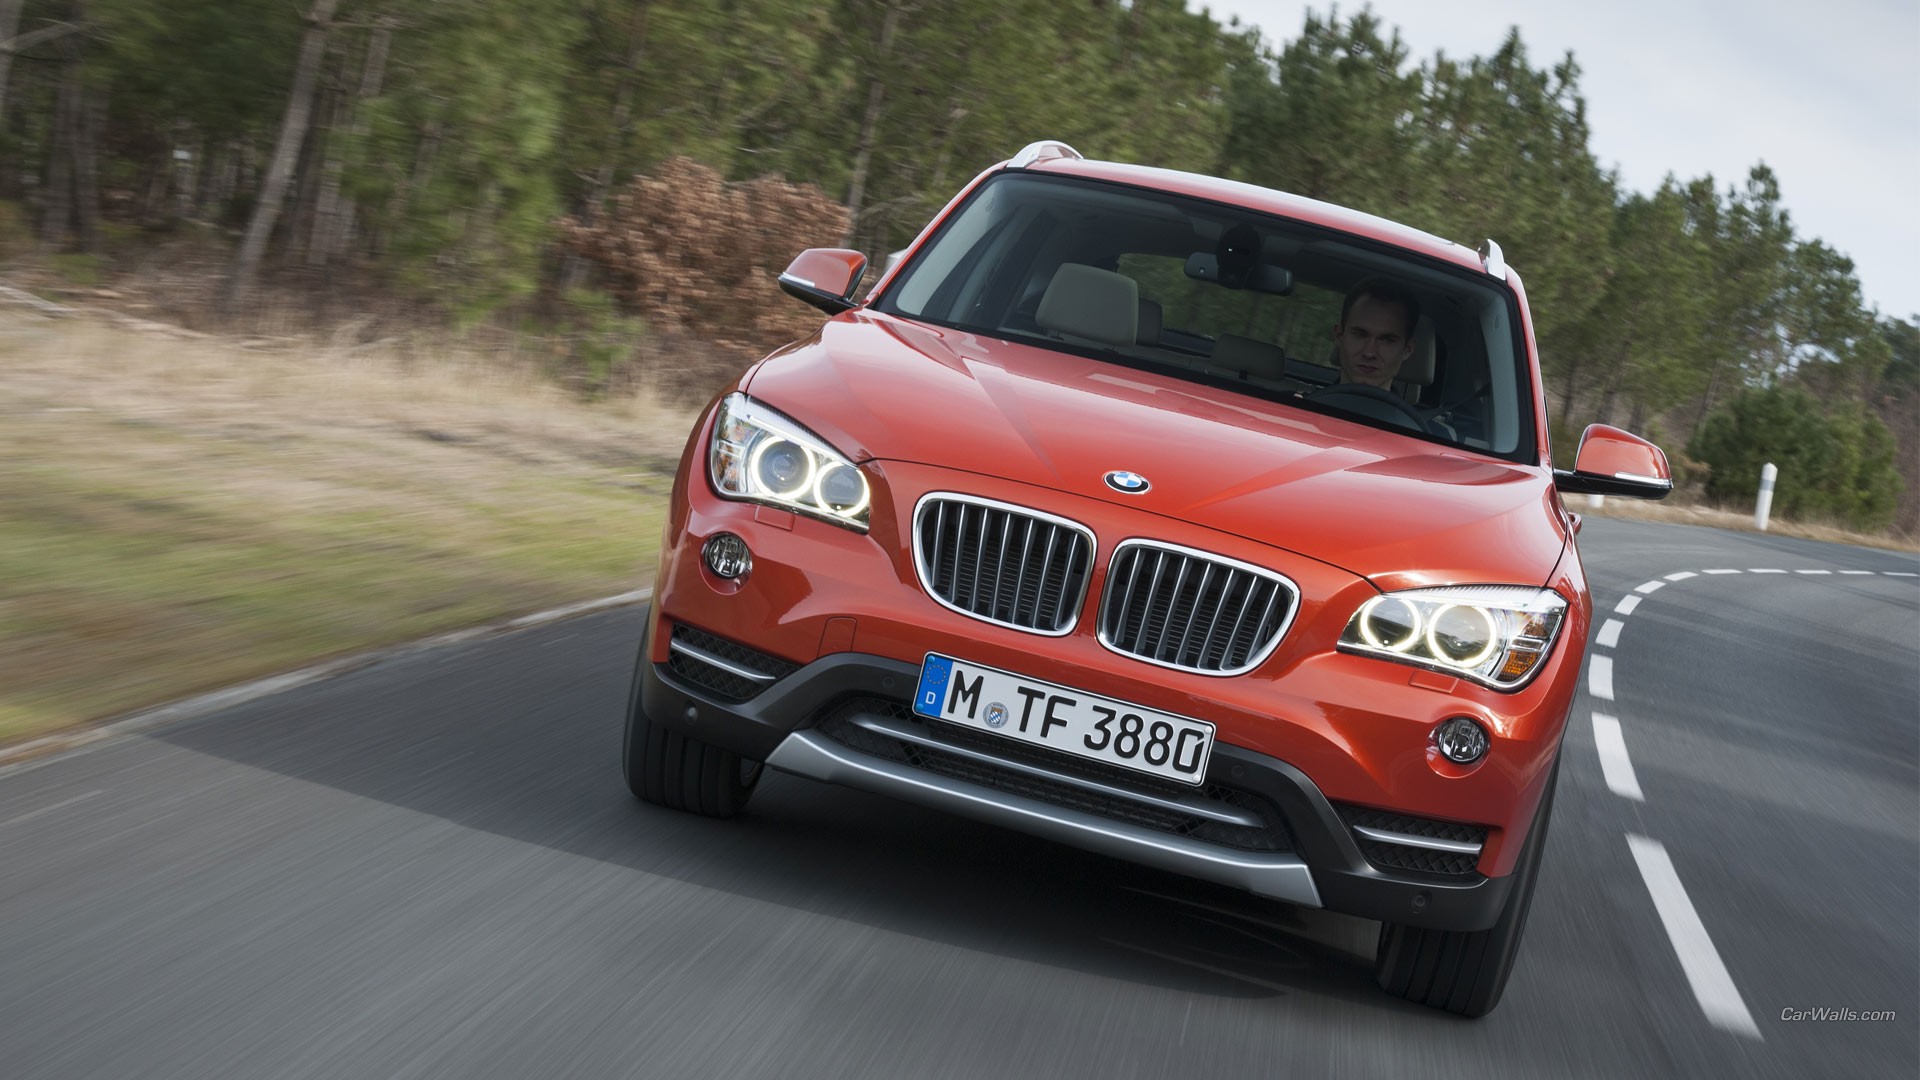 General 1920x1080 BMW X1 car frontal view BMW vehicle red cars road men German cars SUV